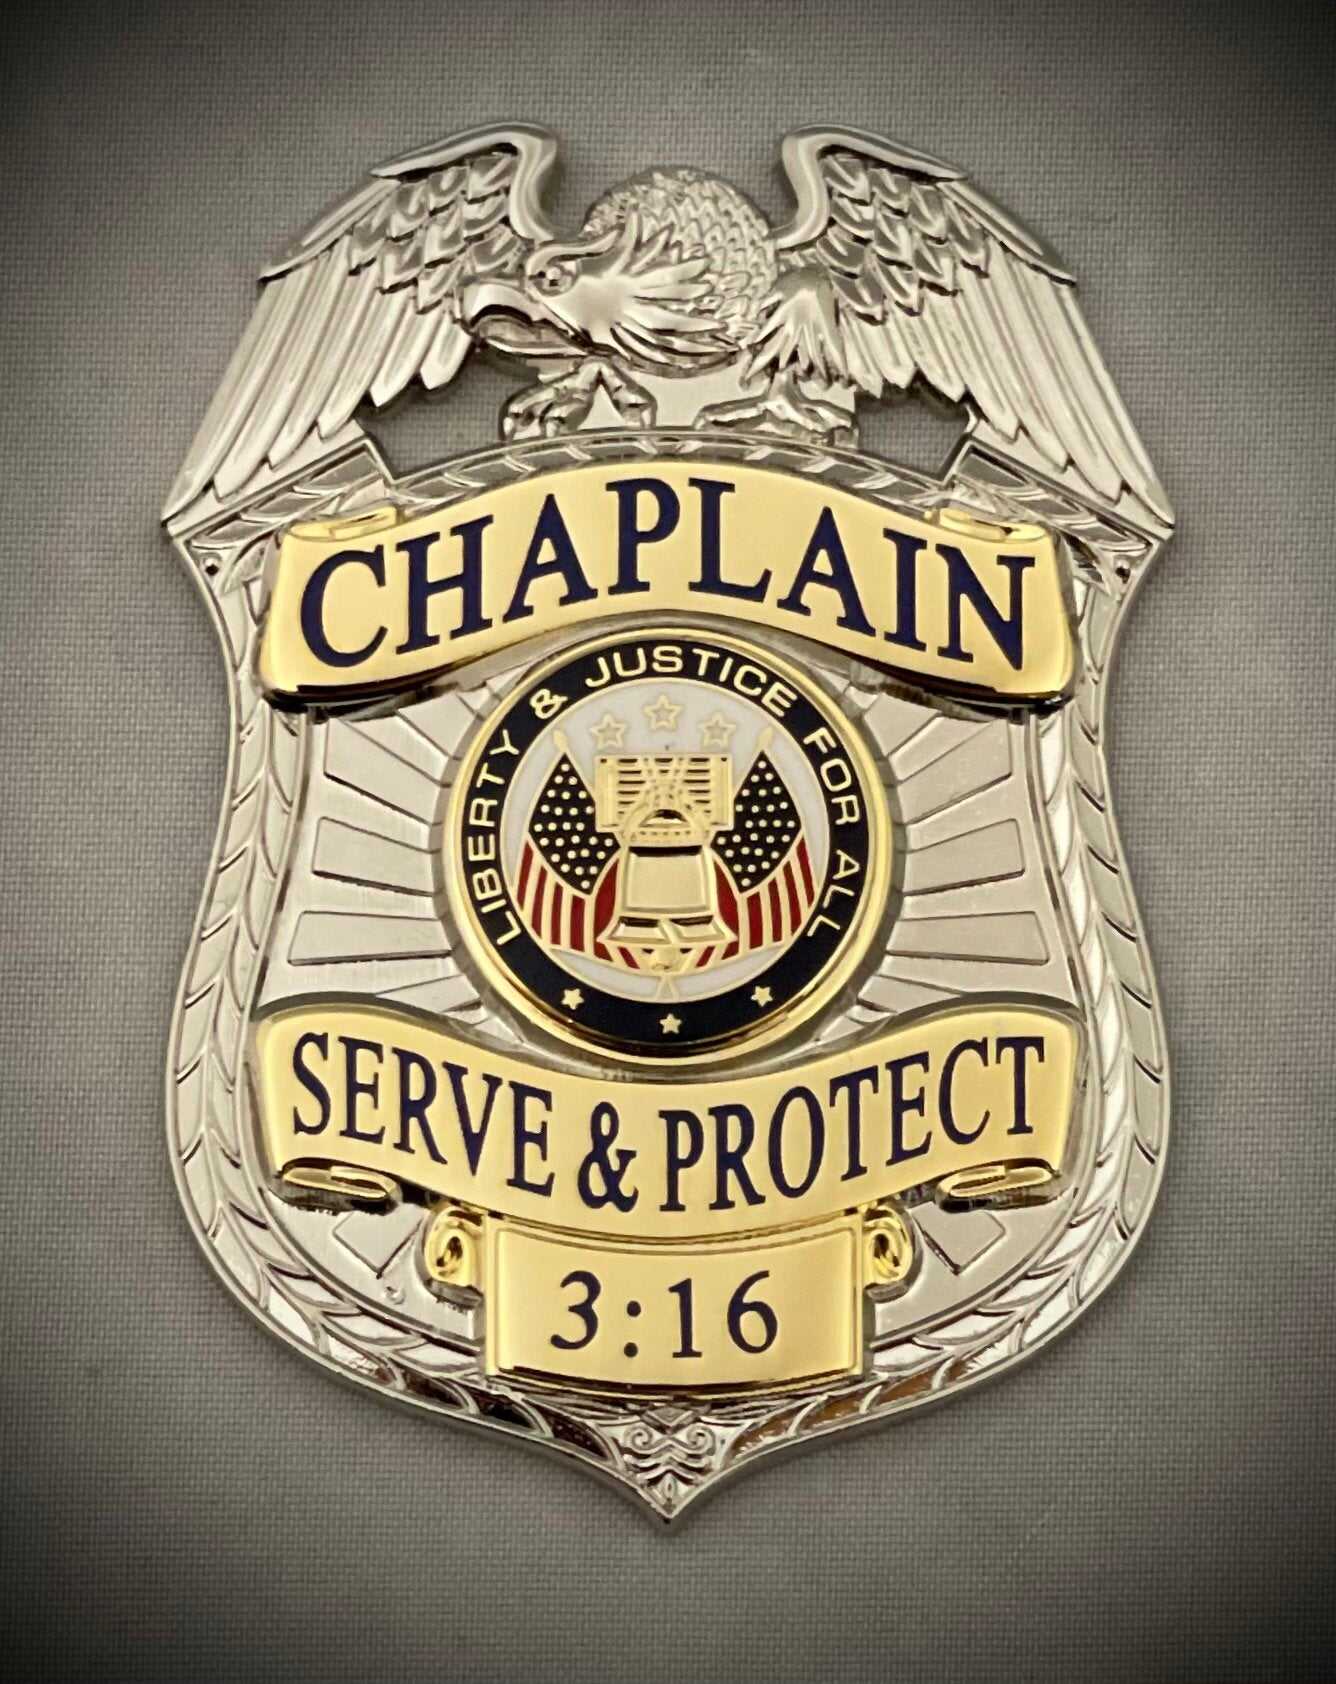 Chaplain Serve and Protect Silver Two-Tone Badge with Black leather belt clip holder